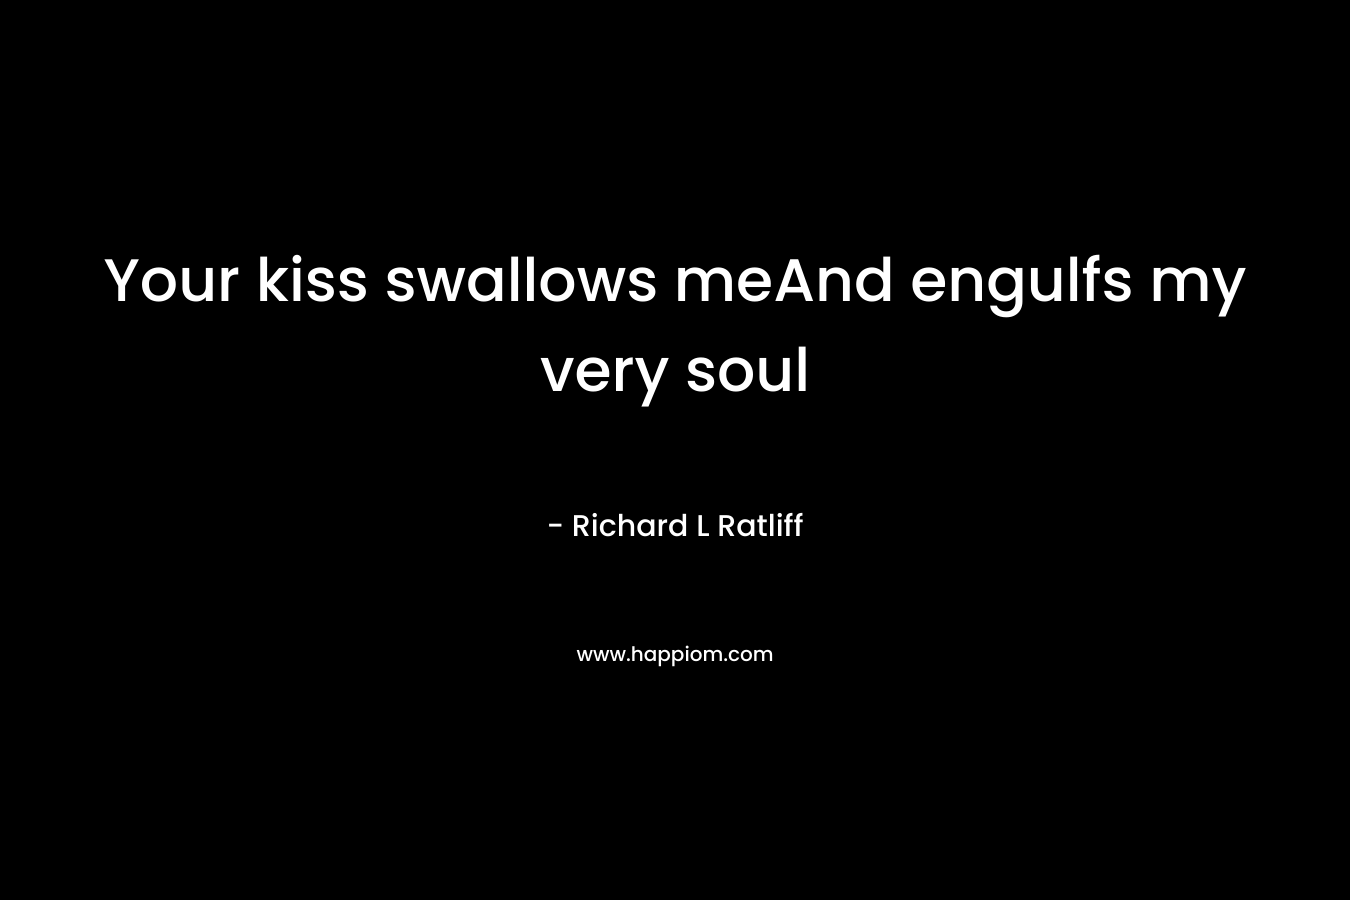 Your kiss swallows meAnd engulfs my very soul